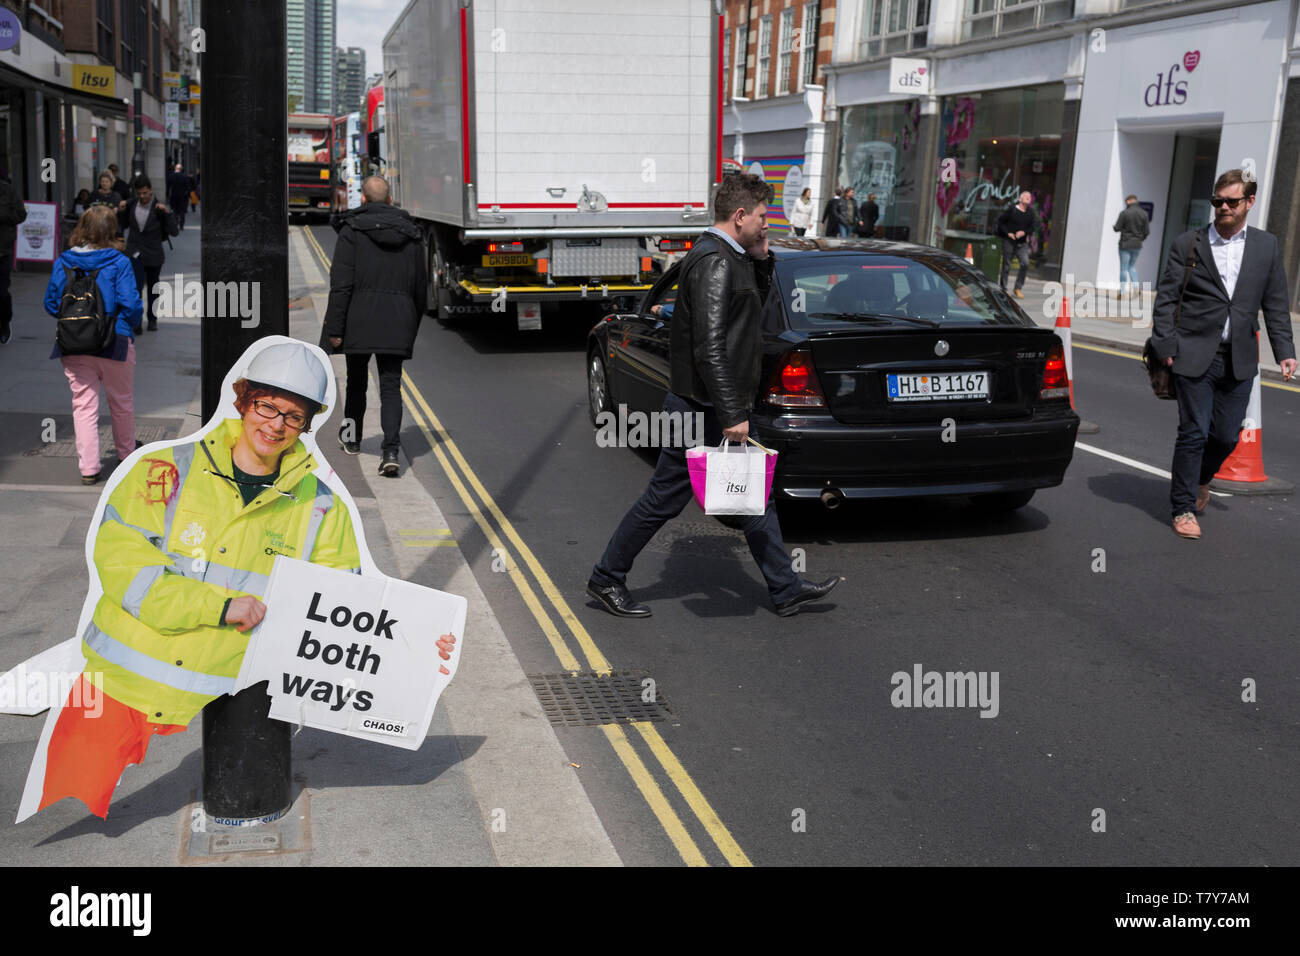 A broken warning construction work figure - one of many up and down both sides of the Tottenham Court Road, warns pedestrians of a change of road layout, from one-way to two-way traffic, on 7th May 2019, in London, England. Stock Photo